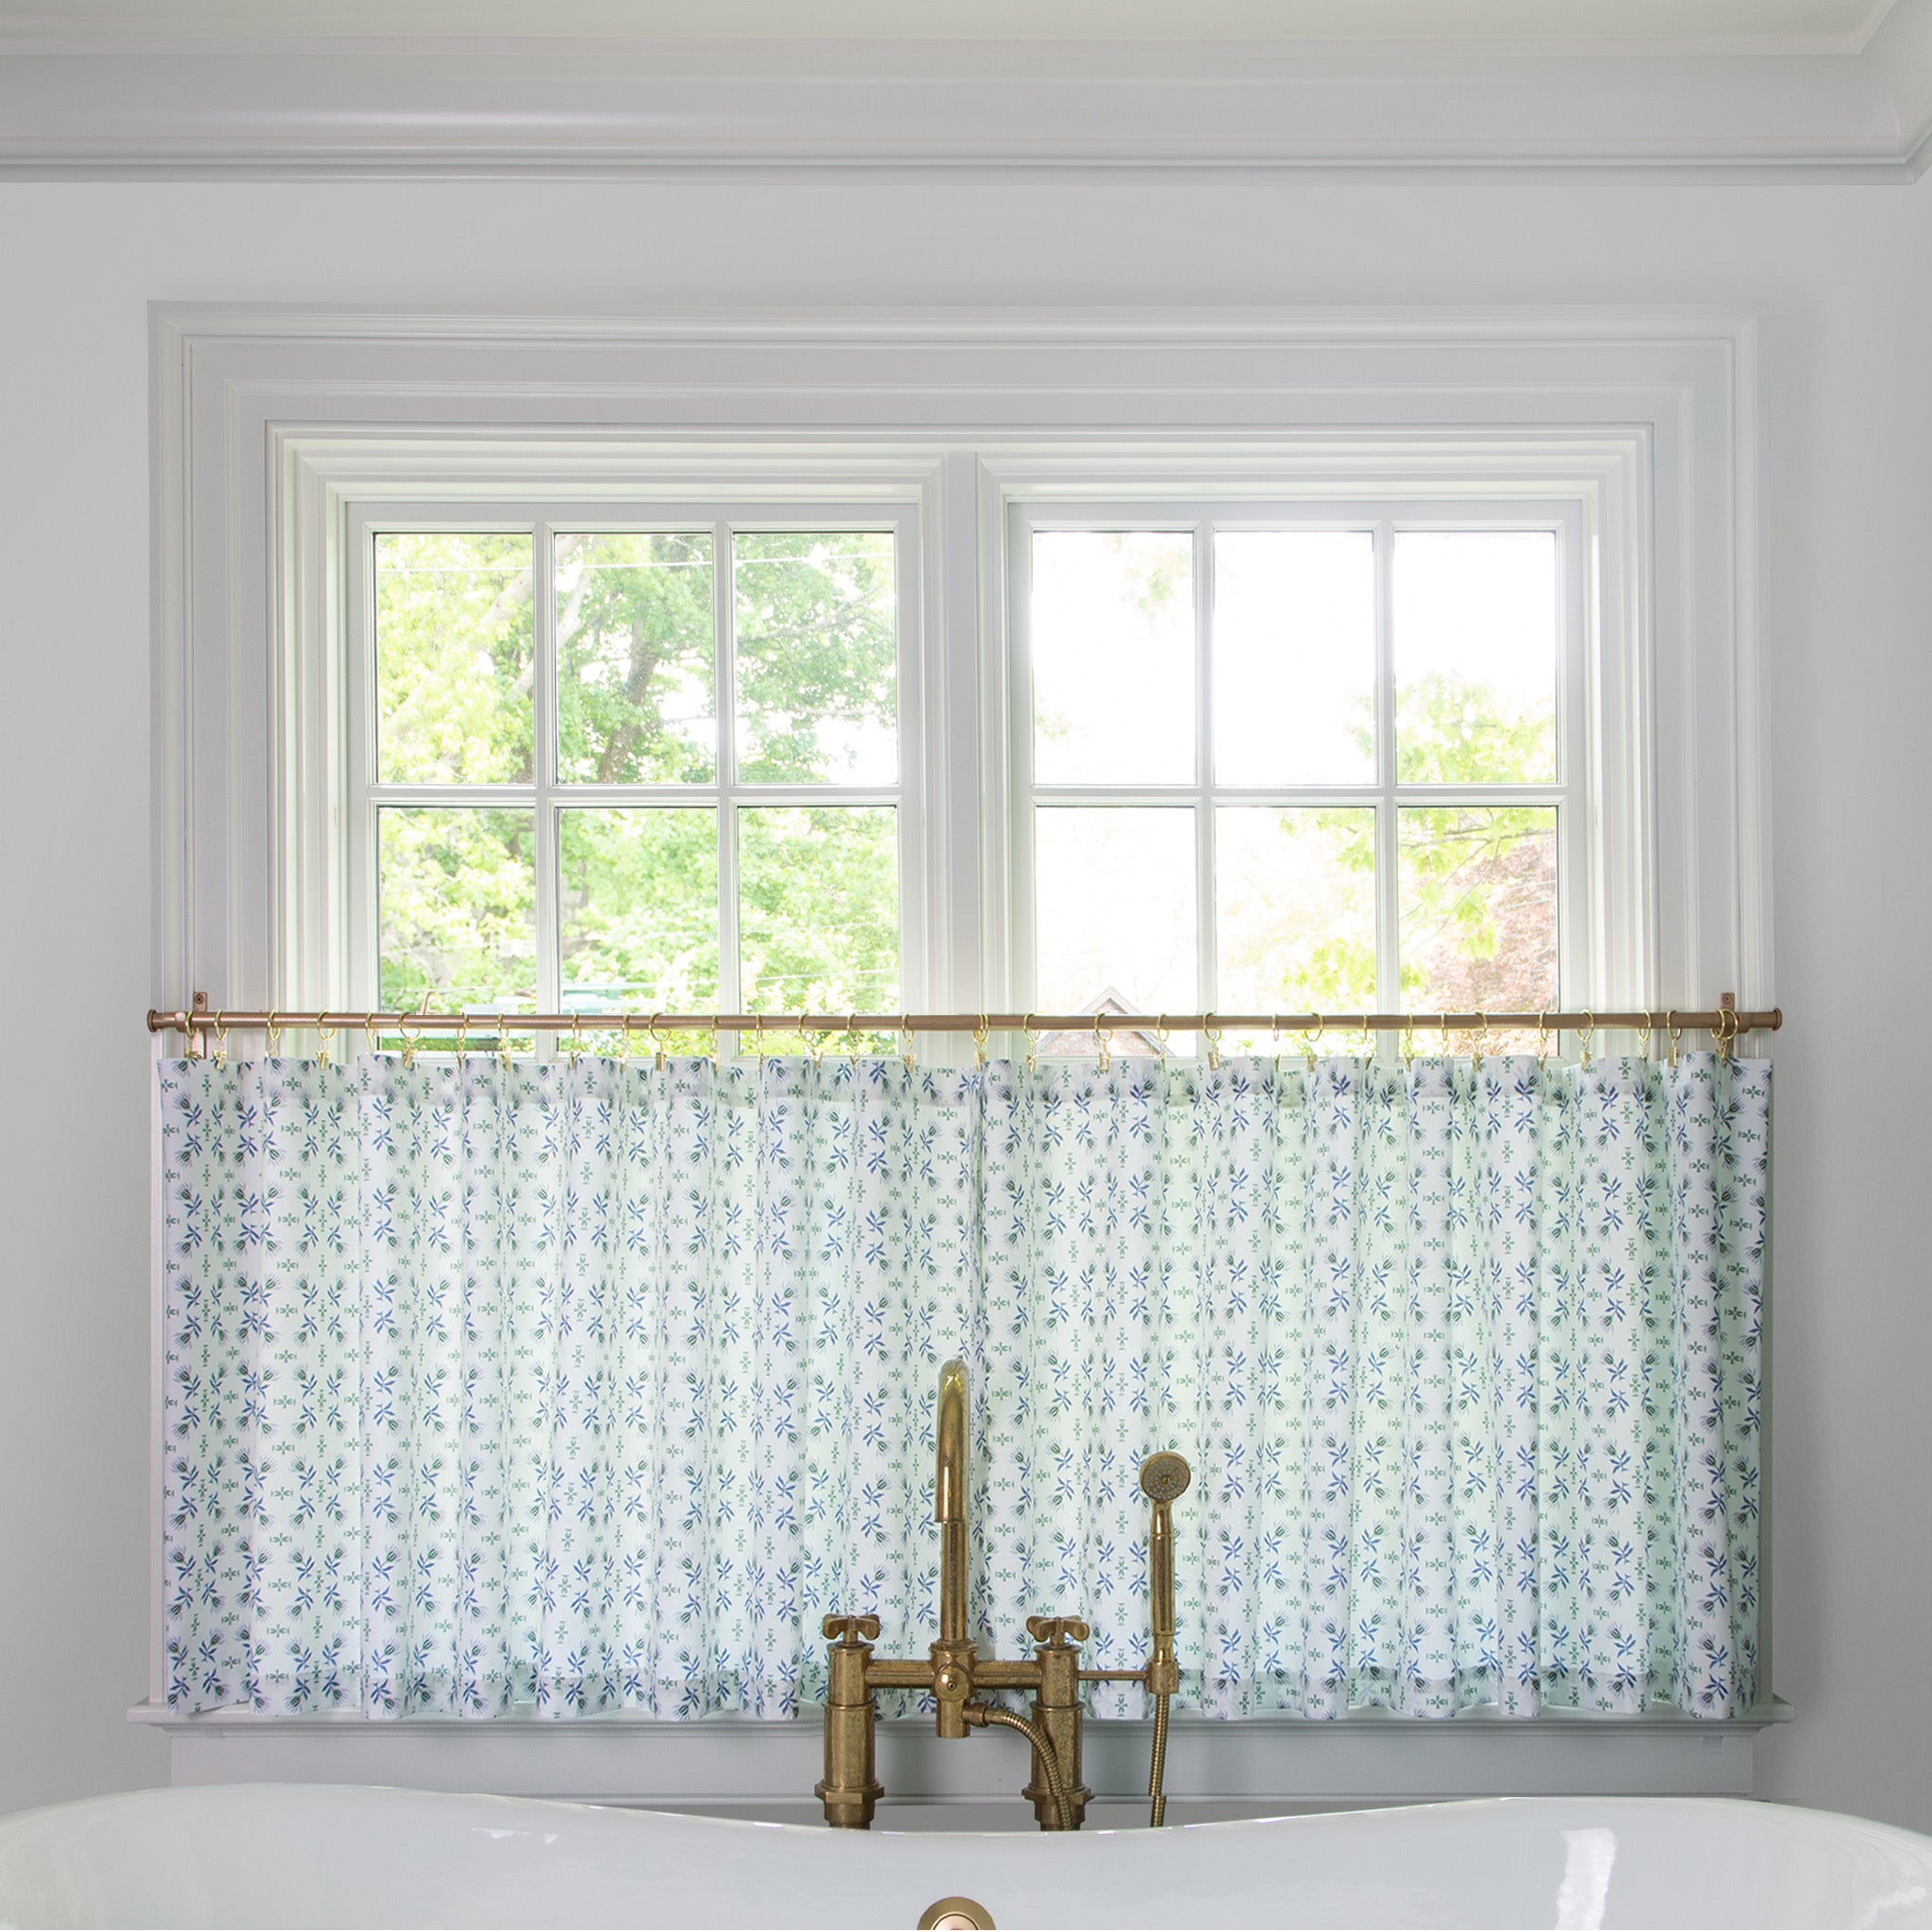  Blue & Green Floral Printed curtain on a metal rod in front of an illuminated window in a bathroom